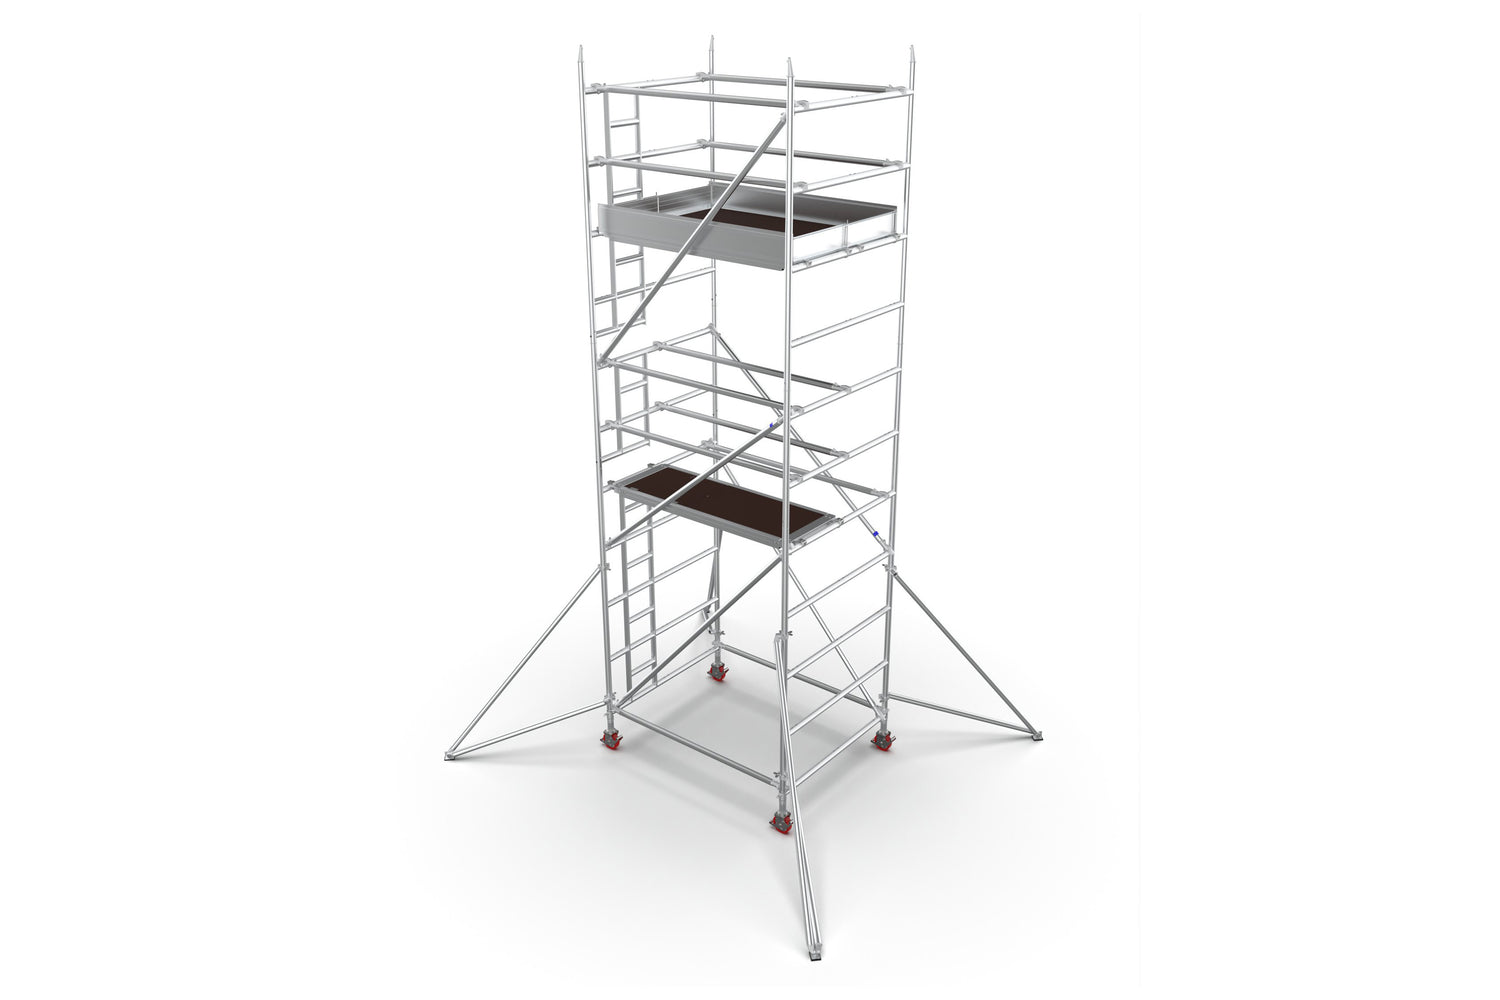 An image showing the Alto HD Ladderspan Tower